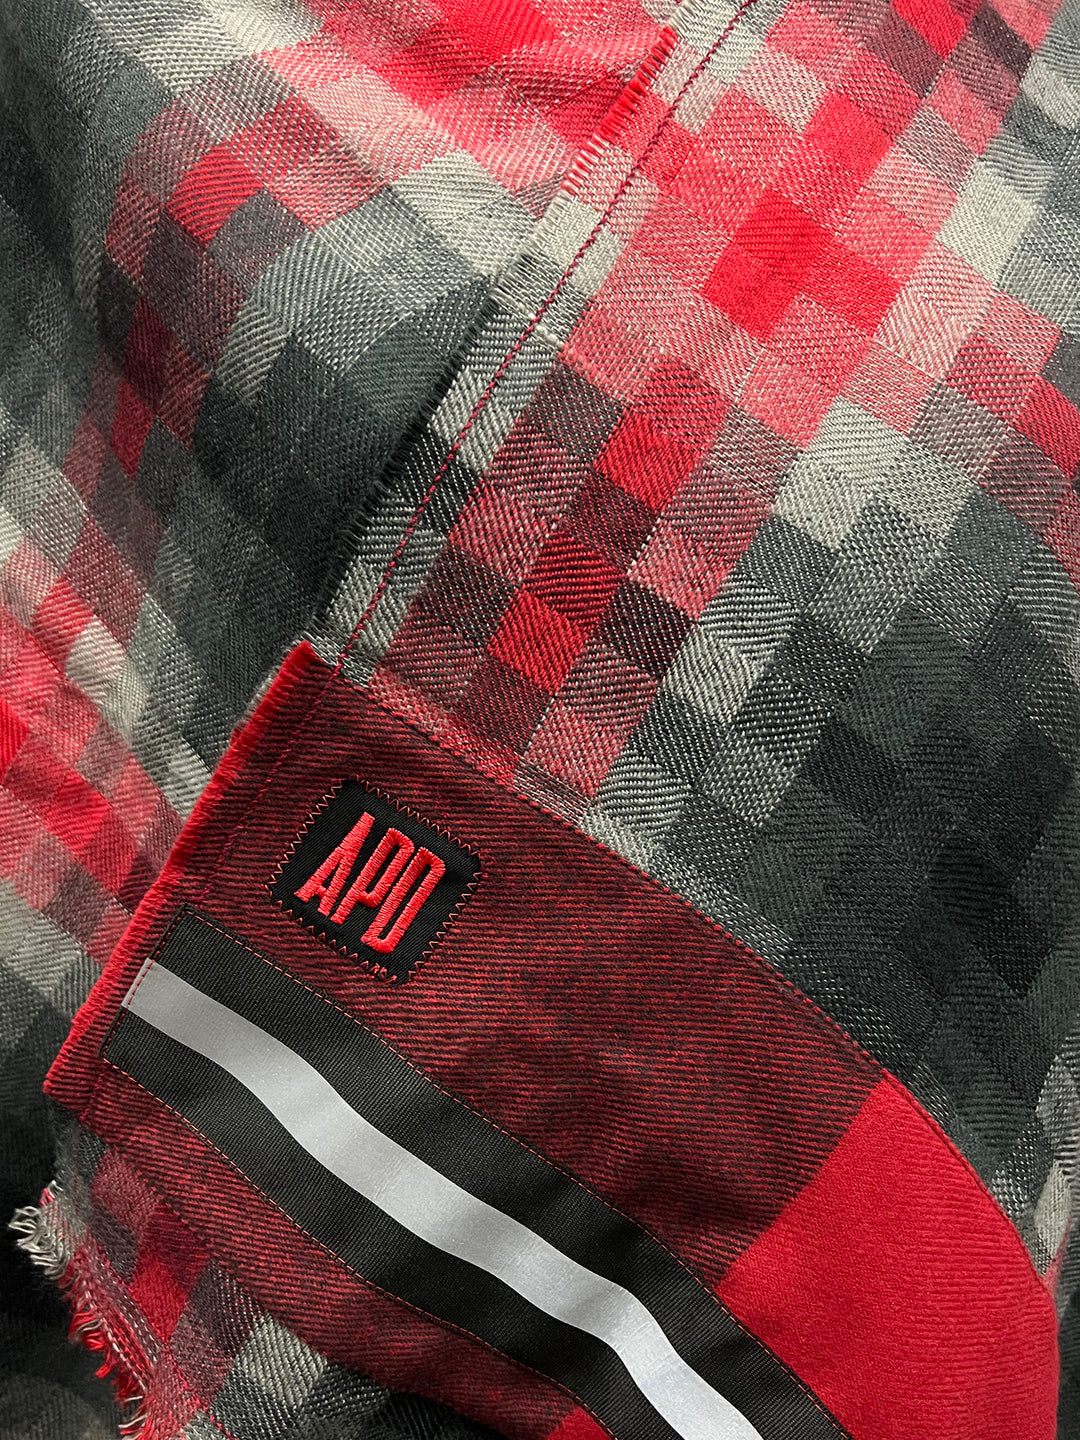 Fringed Scarf in Red, Black, and Grey Pixelated Print